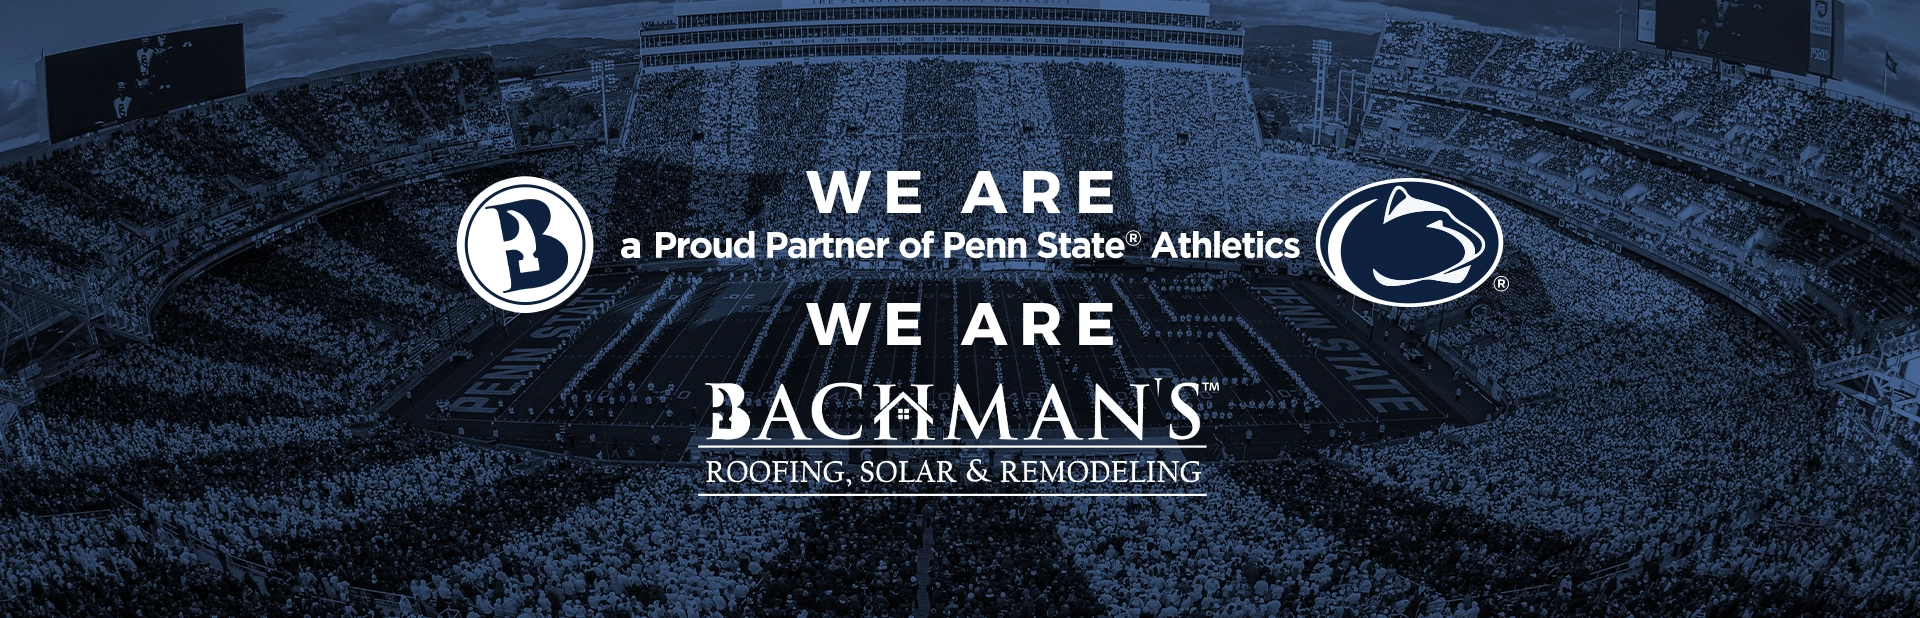 Bachman’s Roofing, Solar & Remodeling Logo